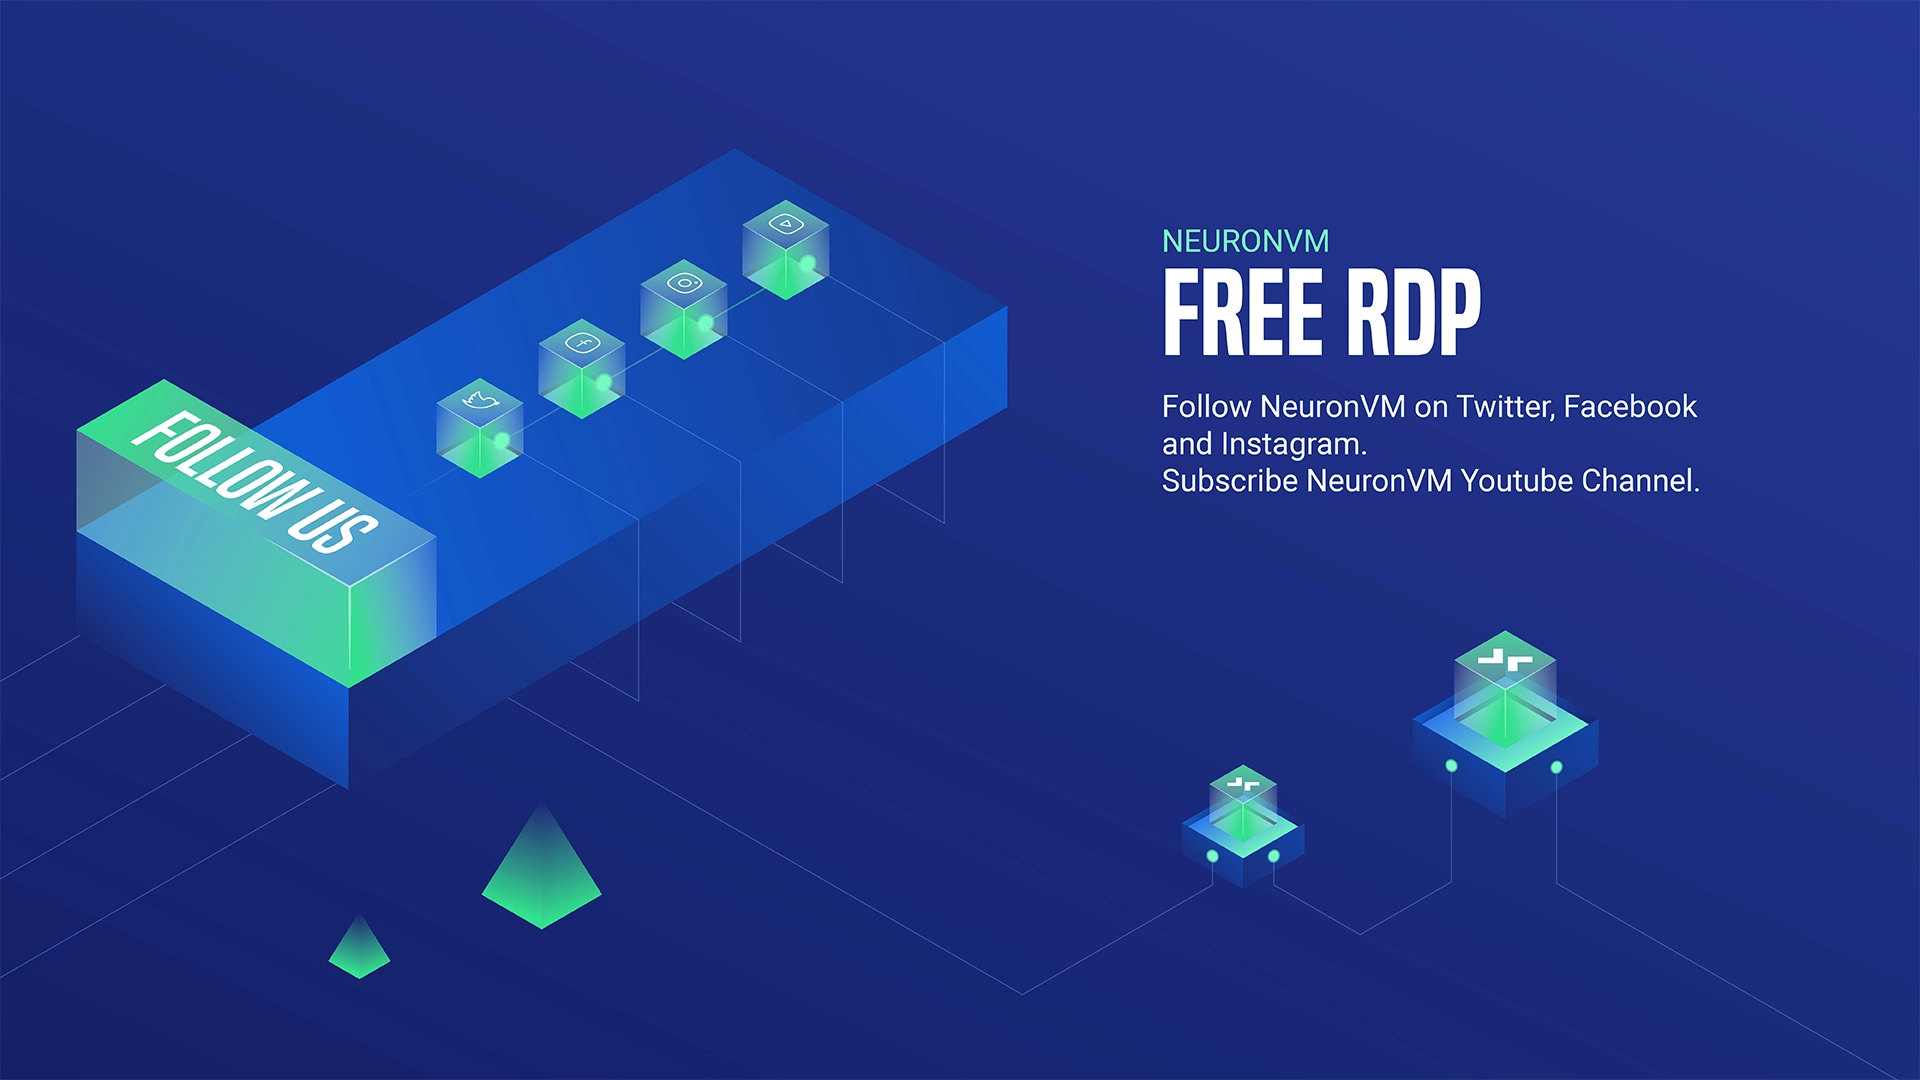 Conditions for Receiving USA Free RDP